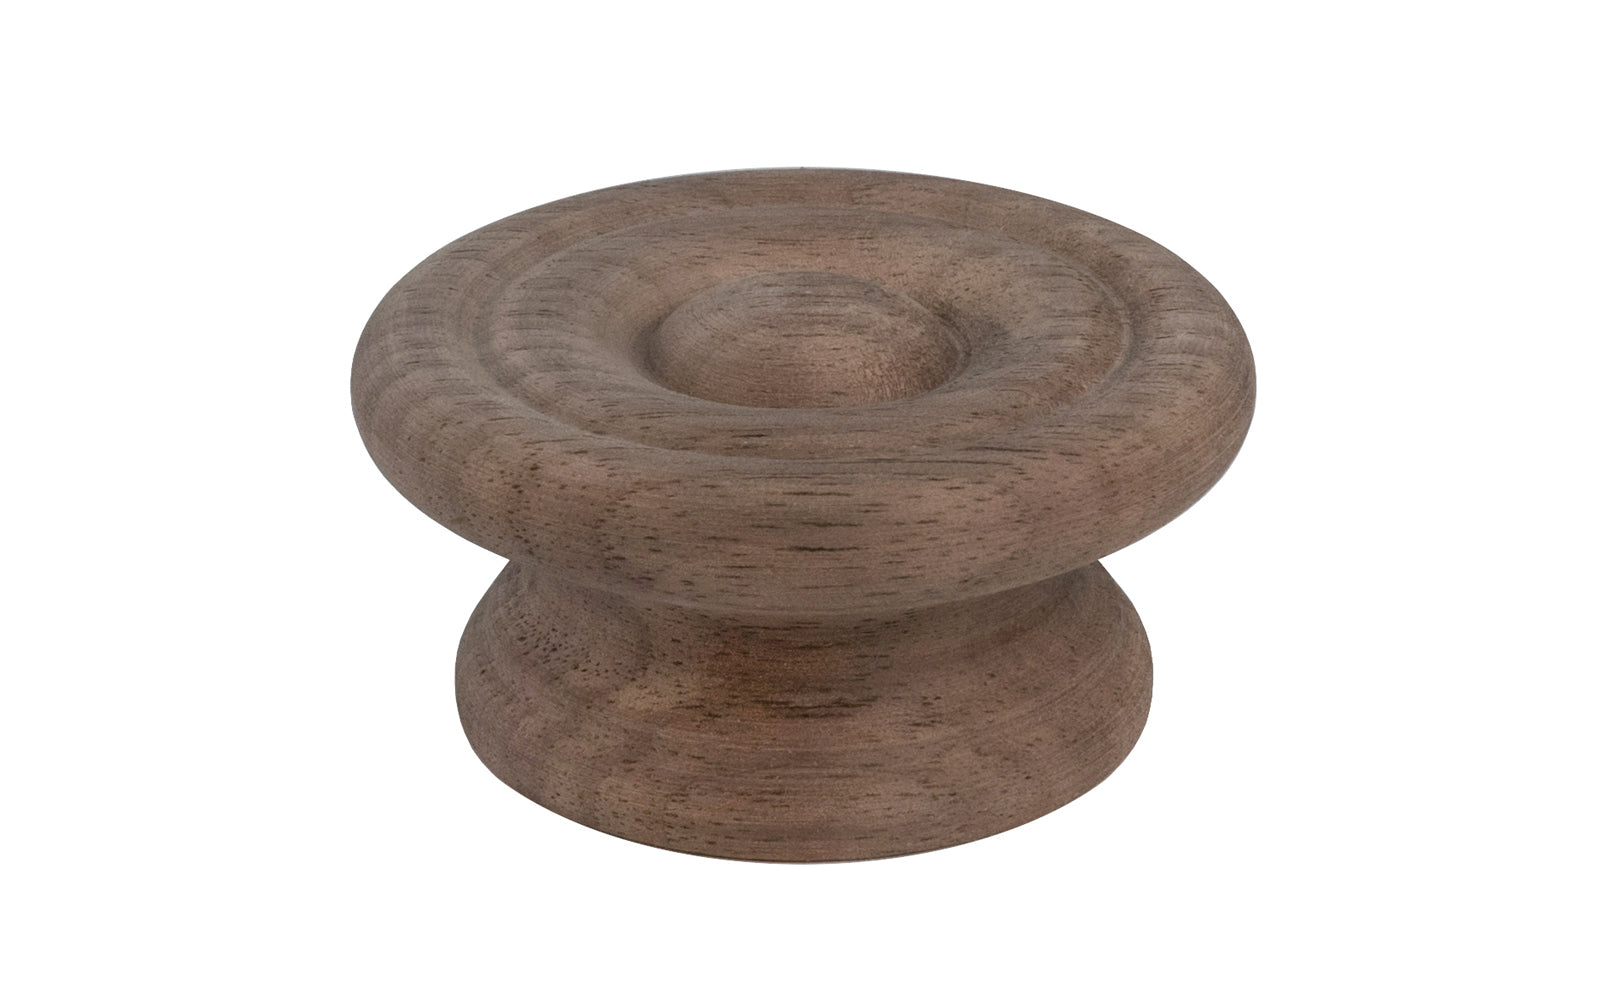 A classic walnut wood round cabinet knob with a smooth ring circle design. They may be stained, painted, or varnished if desired. Late 19th Century style of hardware. Great for a wide variety of uses including drawers, kitchen cabinets, smaller doors, furniture, cabinet doors. 2" Diameter Knob.